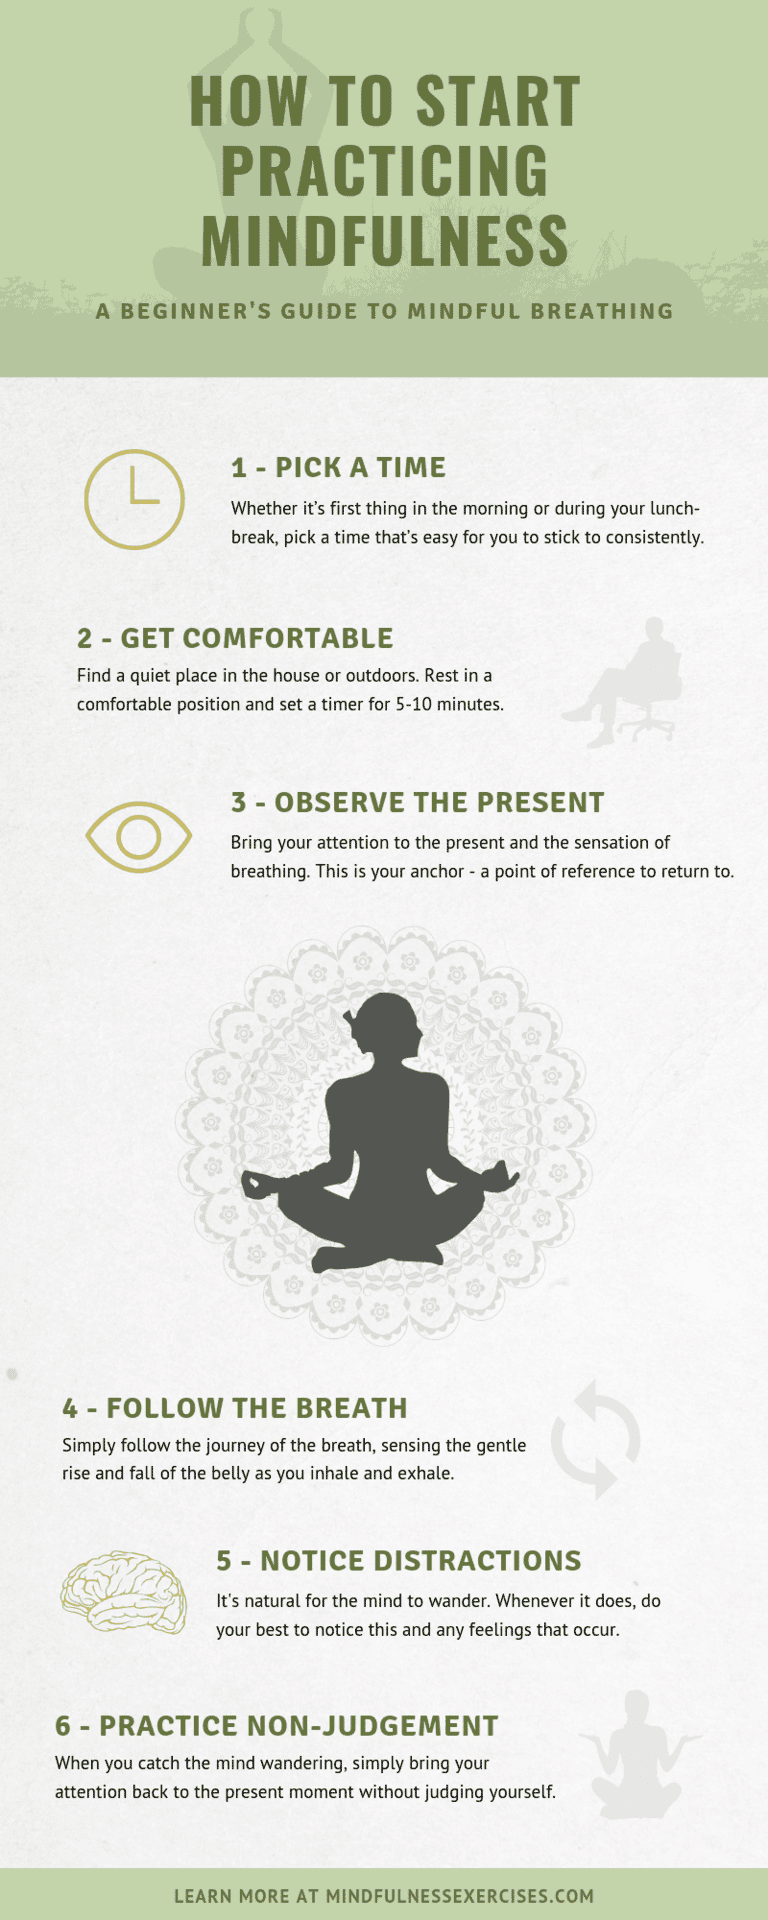 8 Mindfulness Exercises for Beginners (+Infographic) How To Start Practicing Mindfulness